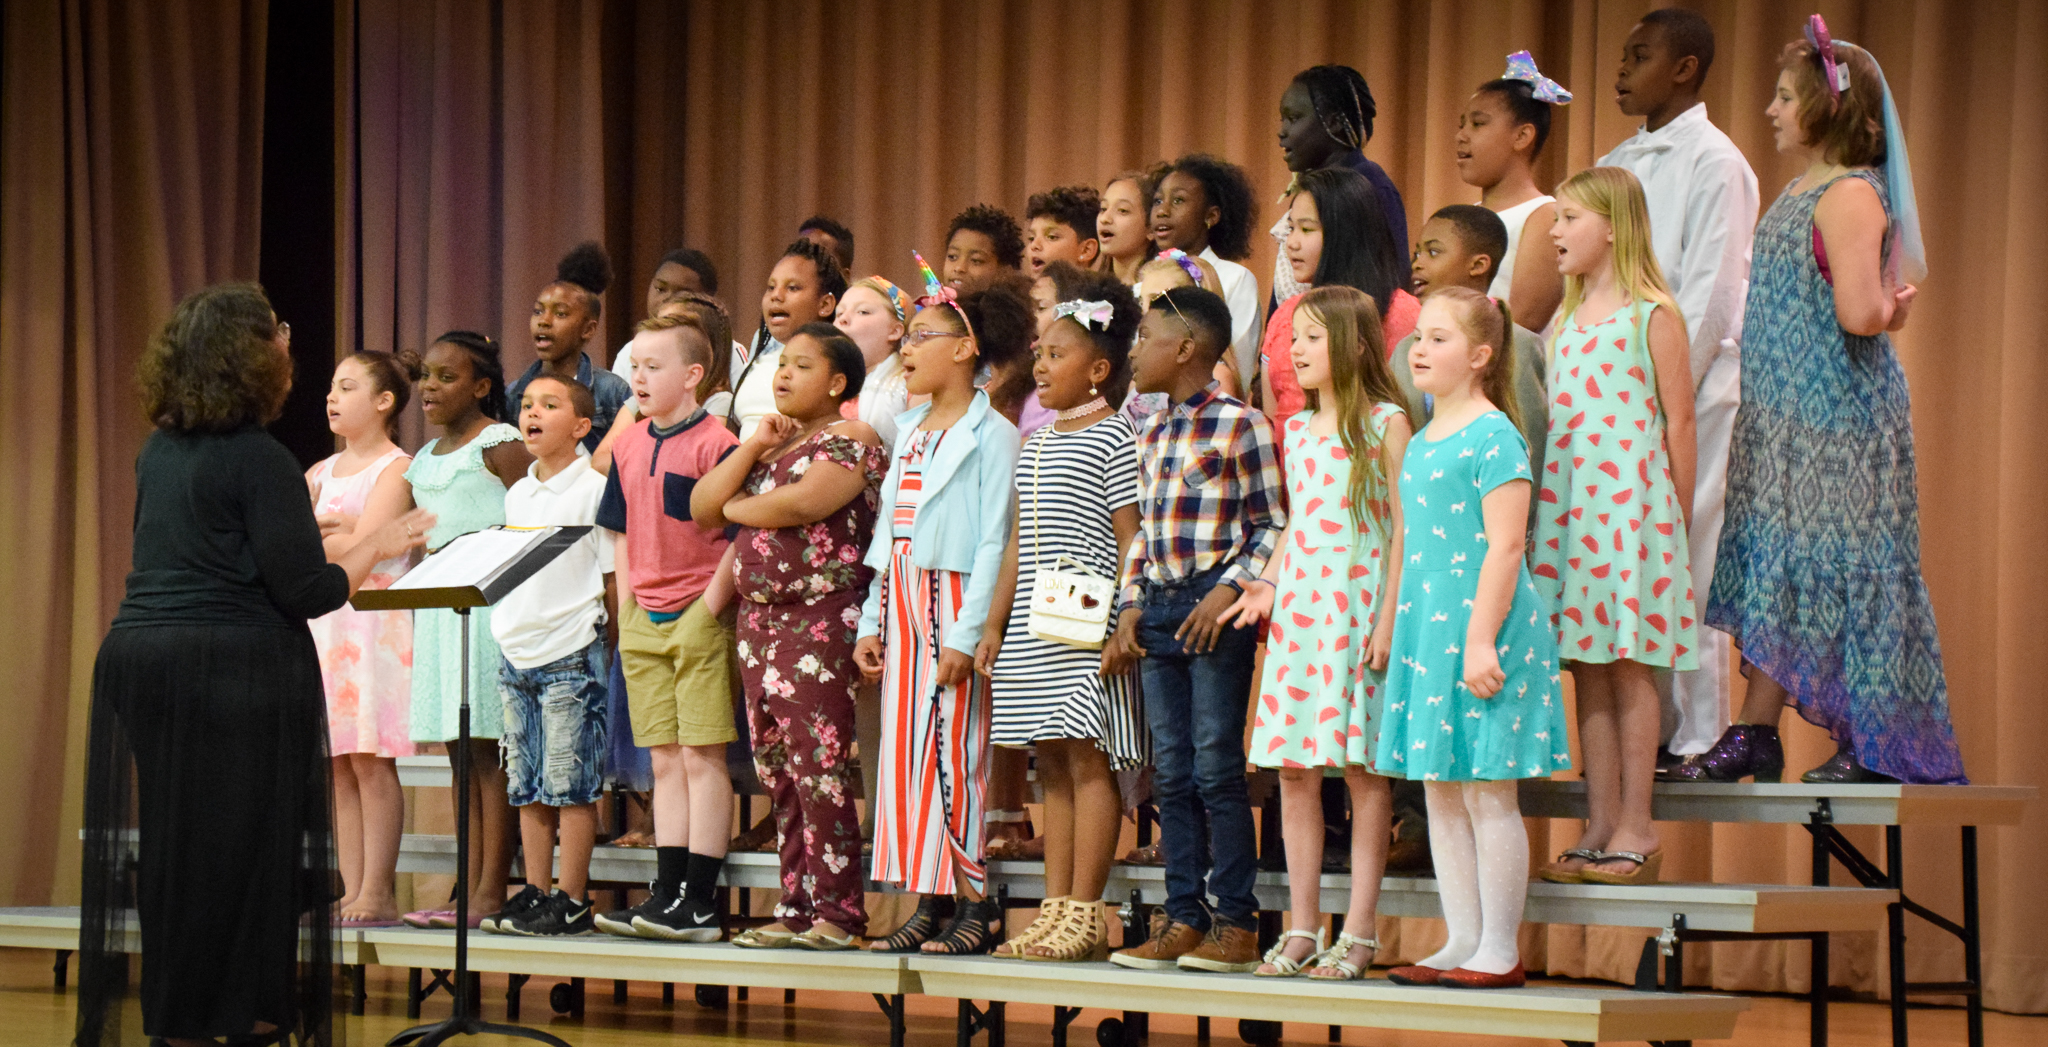 SASCS Atoms spring concert and art show. This year's theme was American Musical Theater.